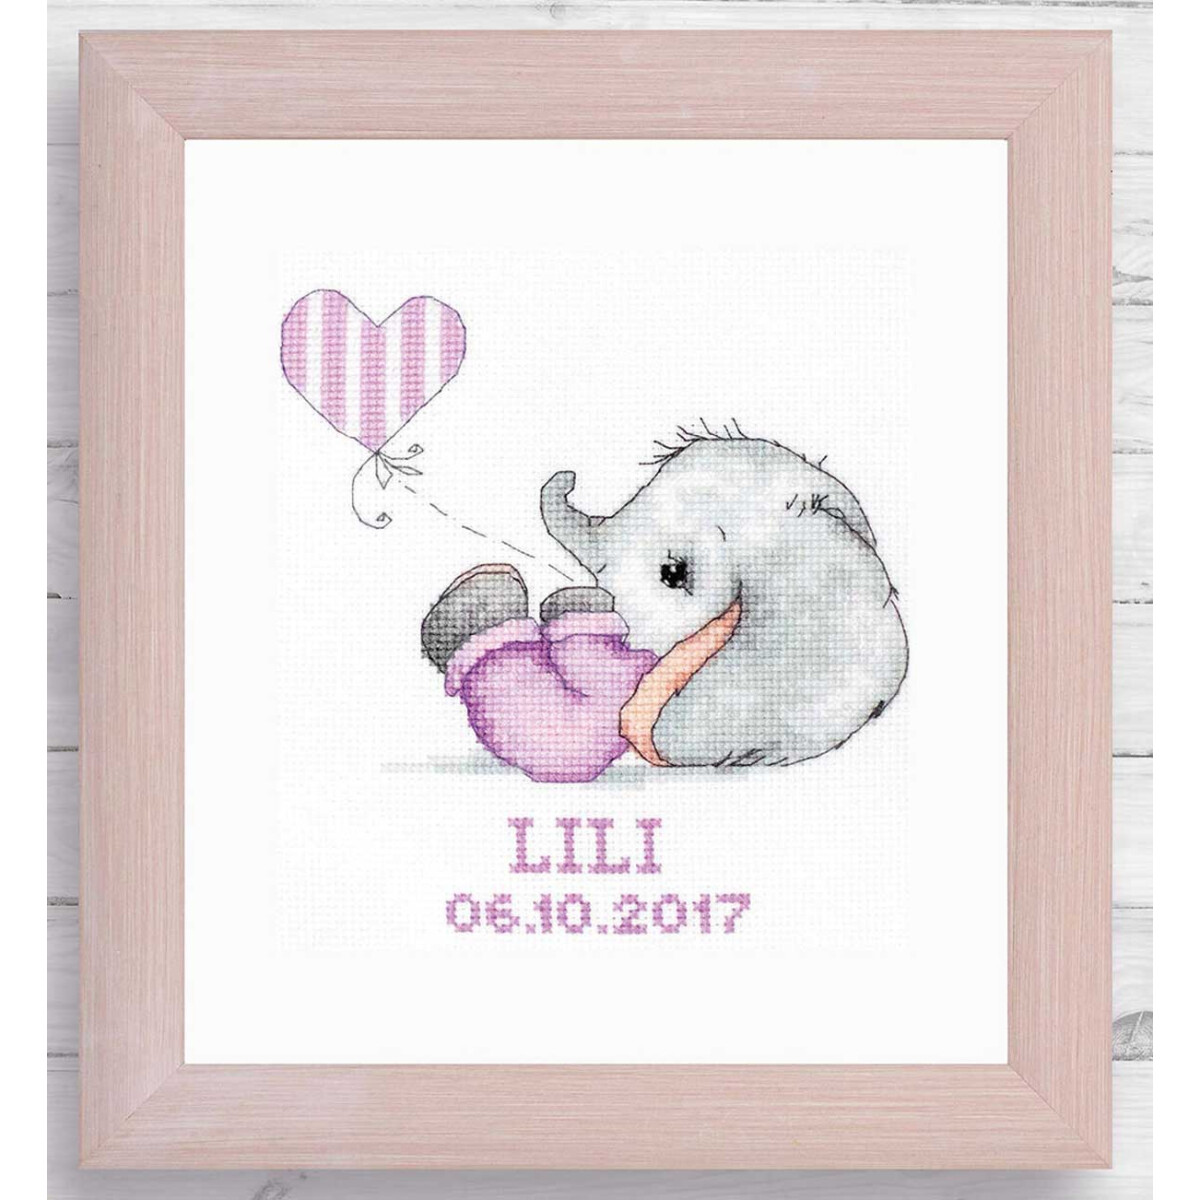 Luca-S counted cross stitch kit with frame "Baby...